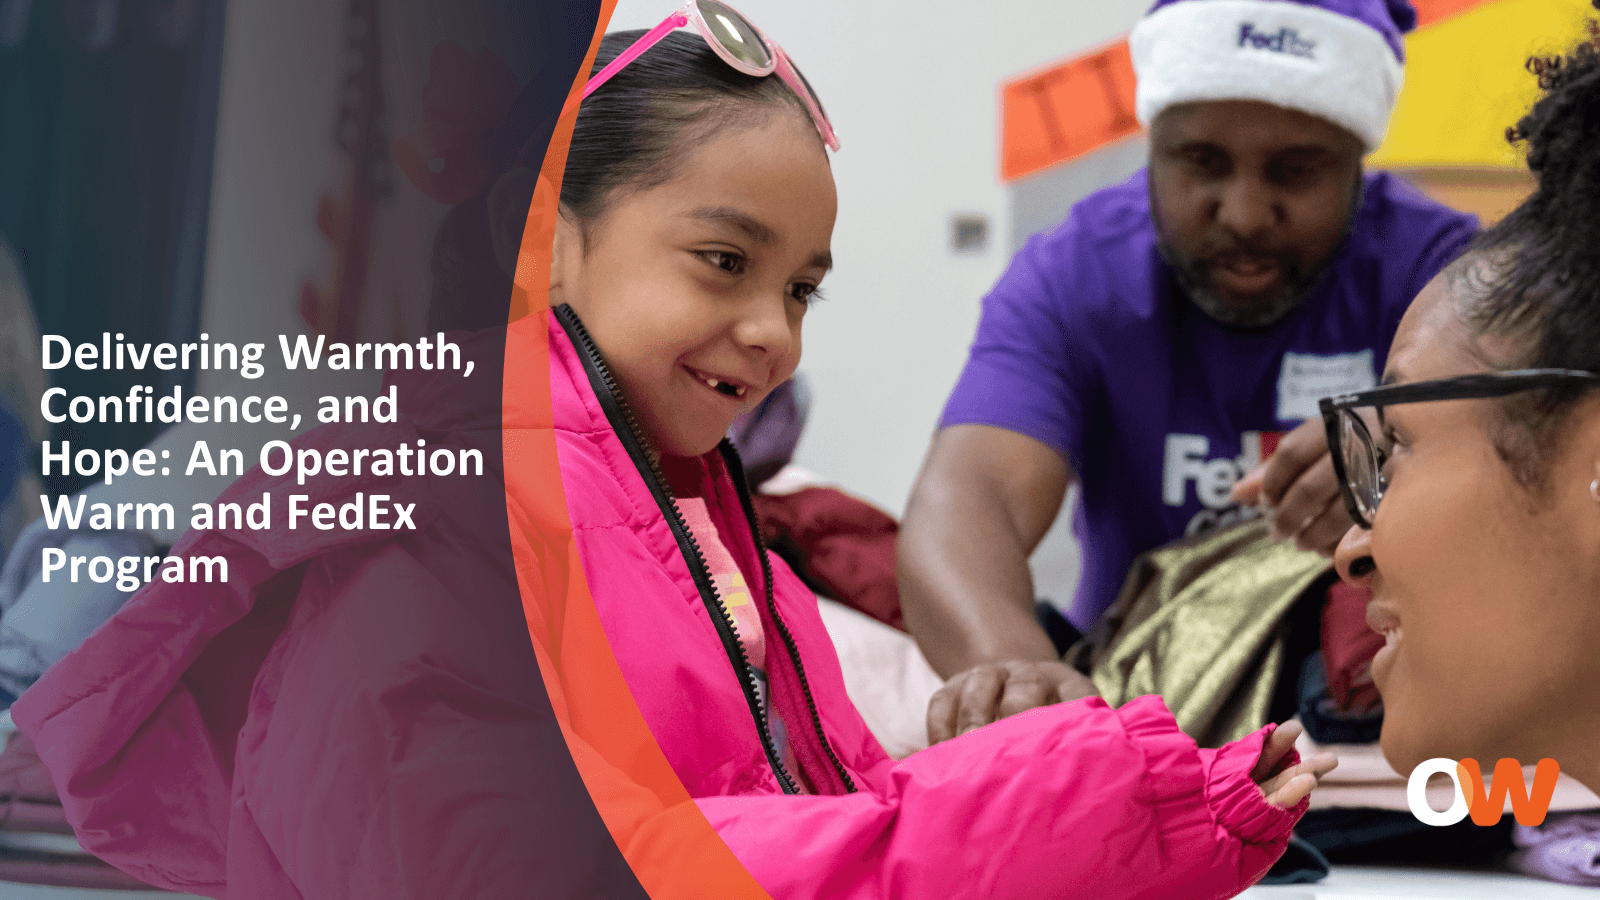 Delivering Warmth, Confidence, and Hope: An Operation Warm and FedEx Program